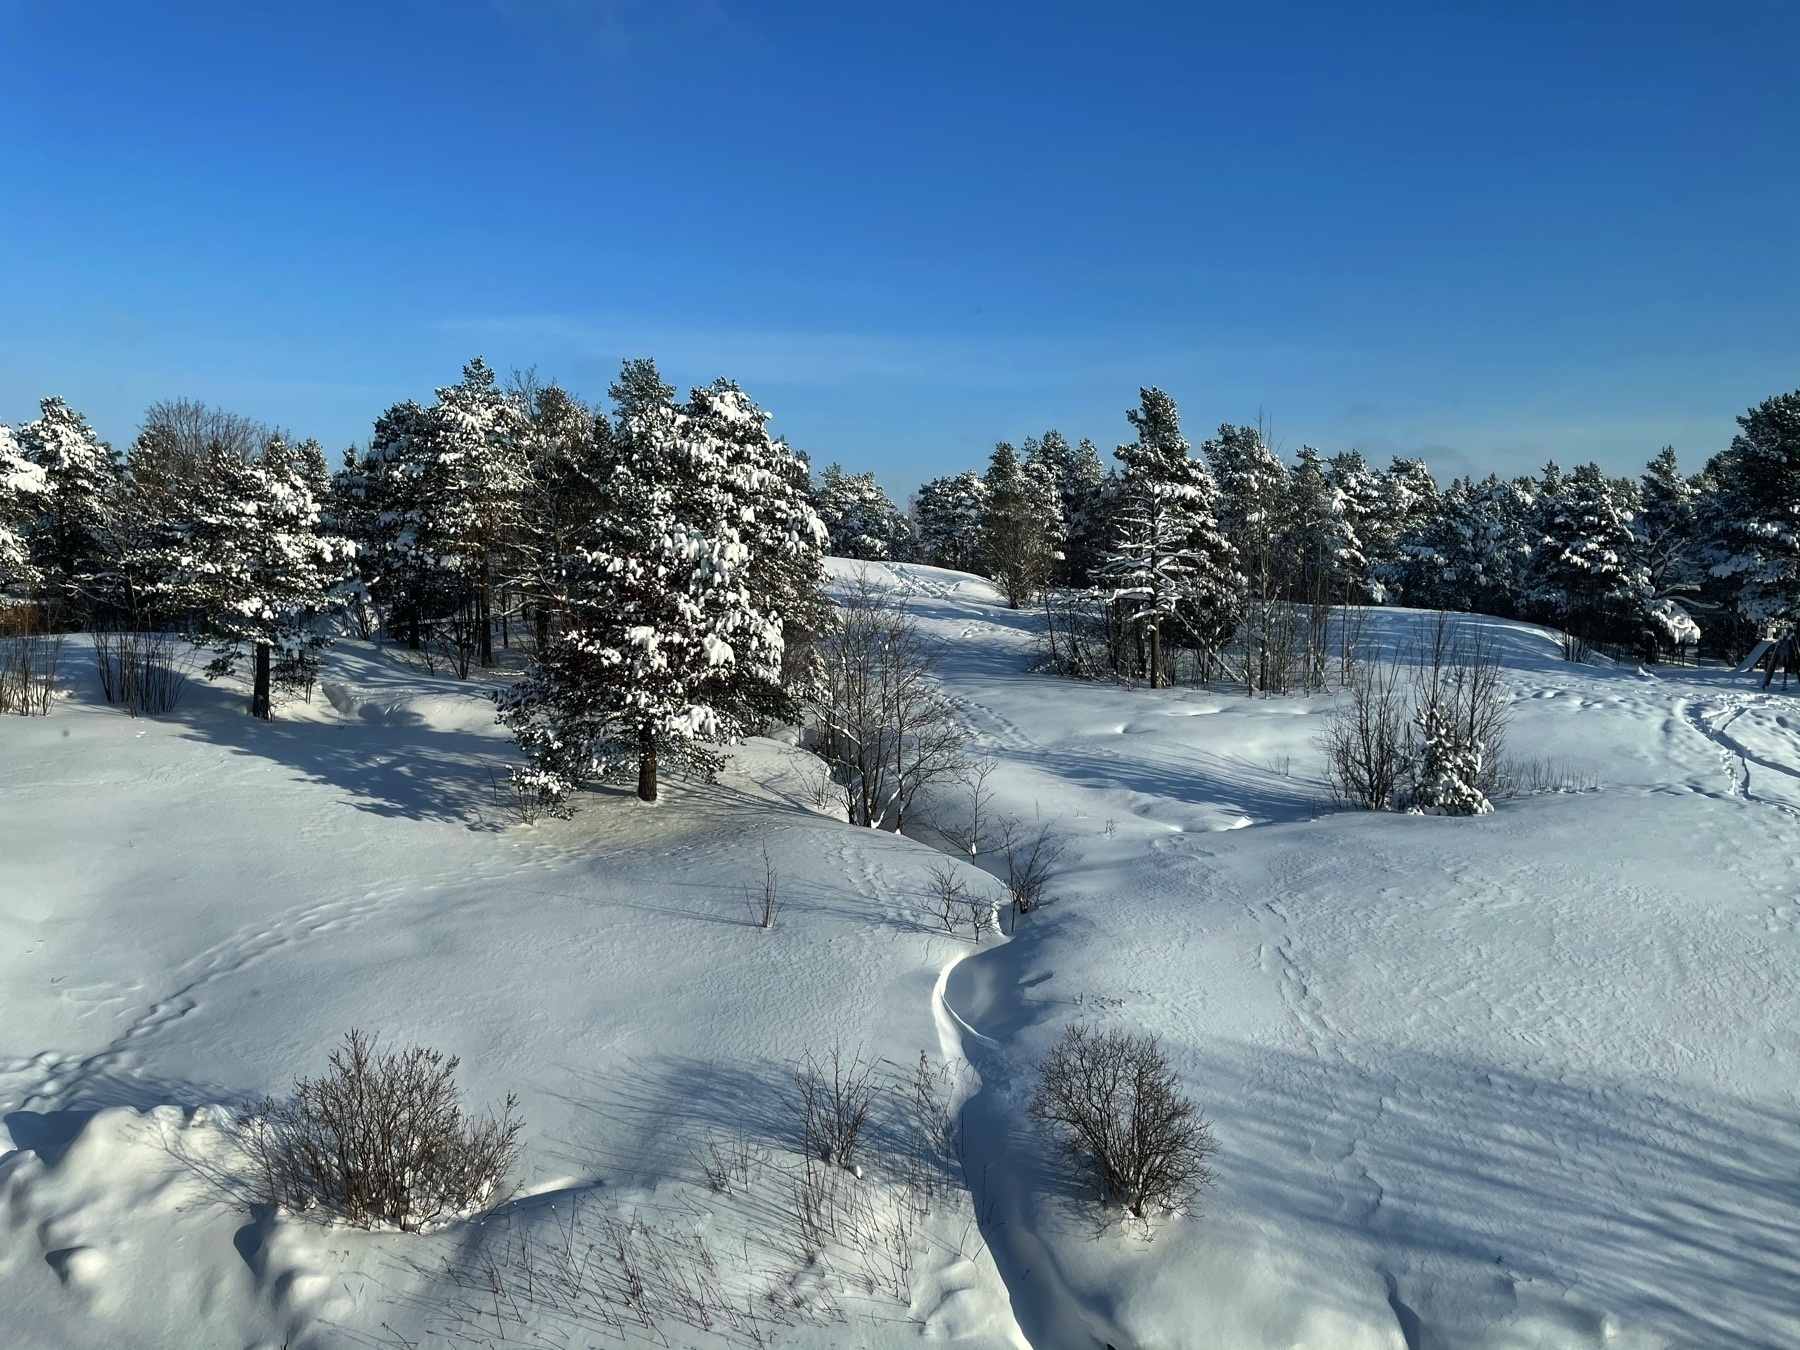 snowy scene, trees, snow dunes, trees covered with snow